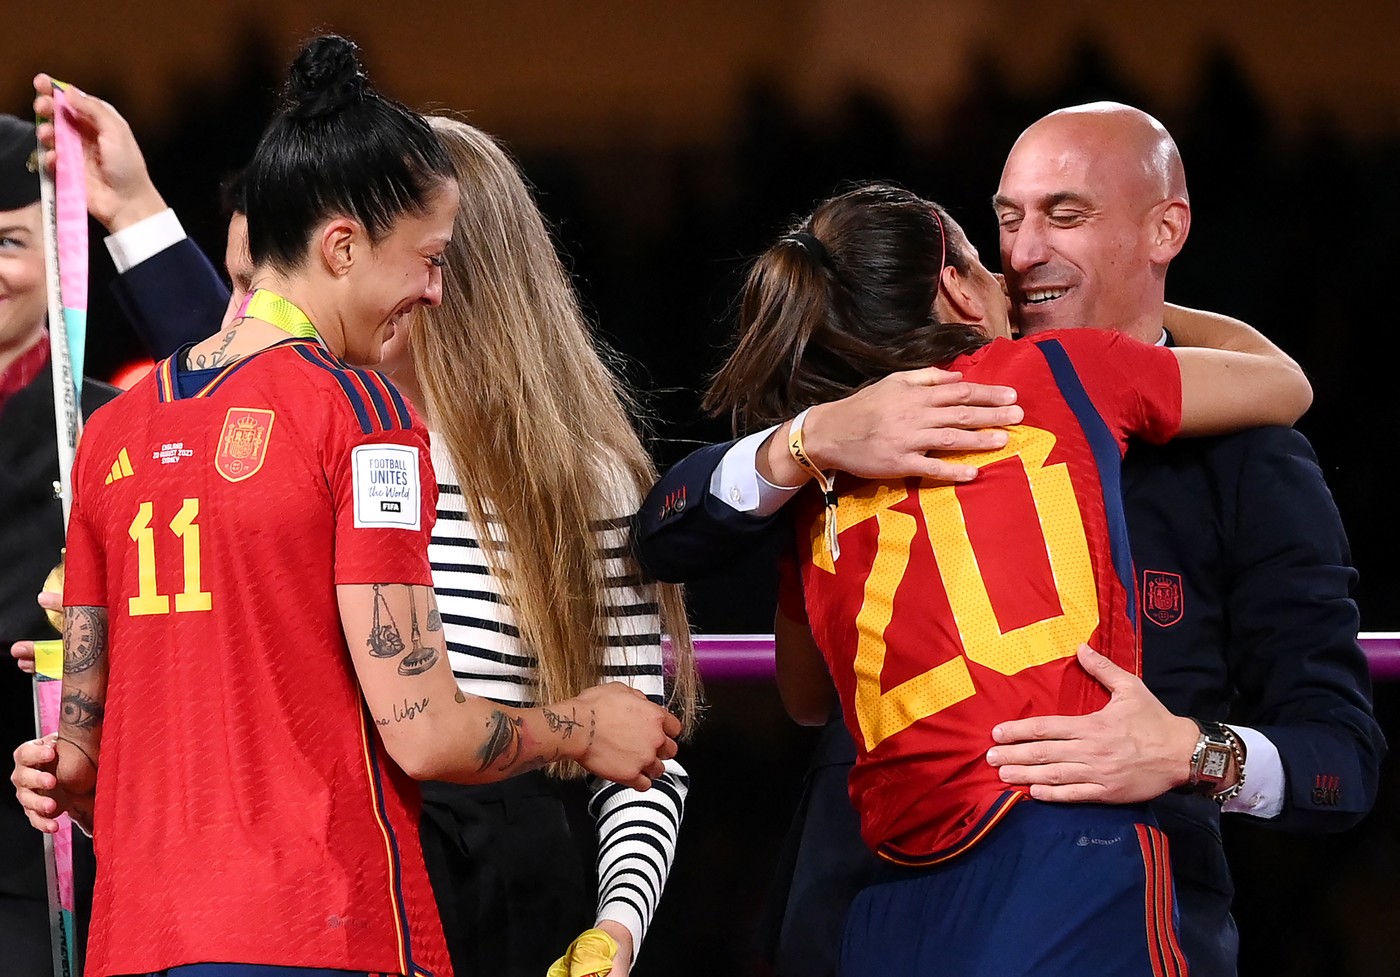 (FILES) Spain's defender #20 Rocio Galvez is congratulated by President of the Royal Spanish Football Federation Luis Rubiales (R) next to Spain's Jennifer Hermoso after winning the Australia and New Zealand 2023 Women's World Cup final football match between Spain and England at Stadium Australia in Sydney on August 20, 2023. Spain prosecutors want Rubiales jailed for 2.5 years for World Cup kiss, AFP reports on March 27, 2024.,Image: 860047669, License: Rights-managed, Restrictions: , Model Release: no, Credit line: FRANCK FIFE / AFP / Profimedia